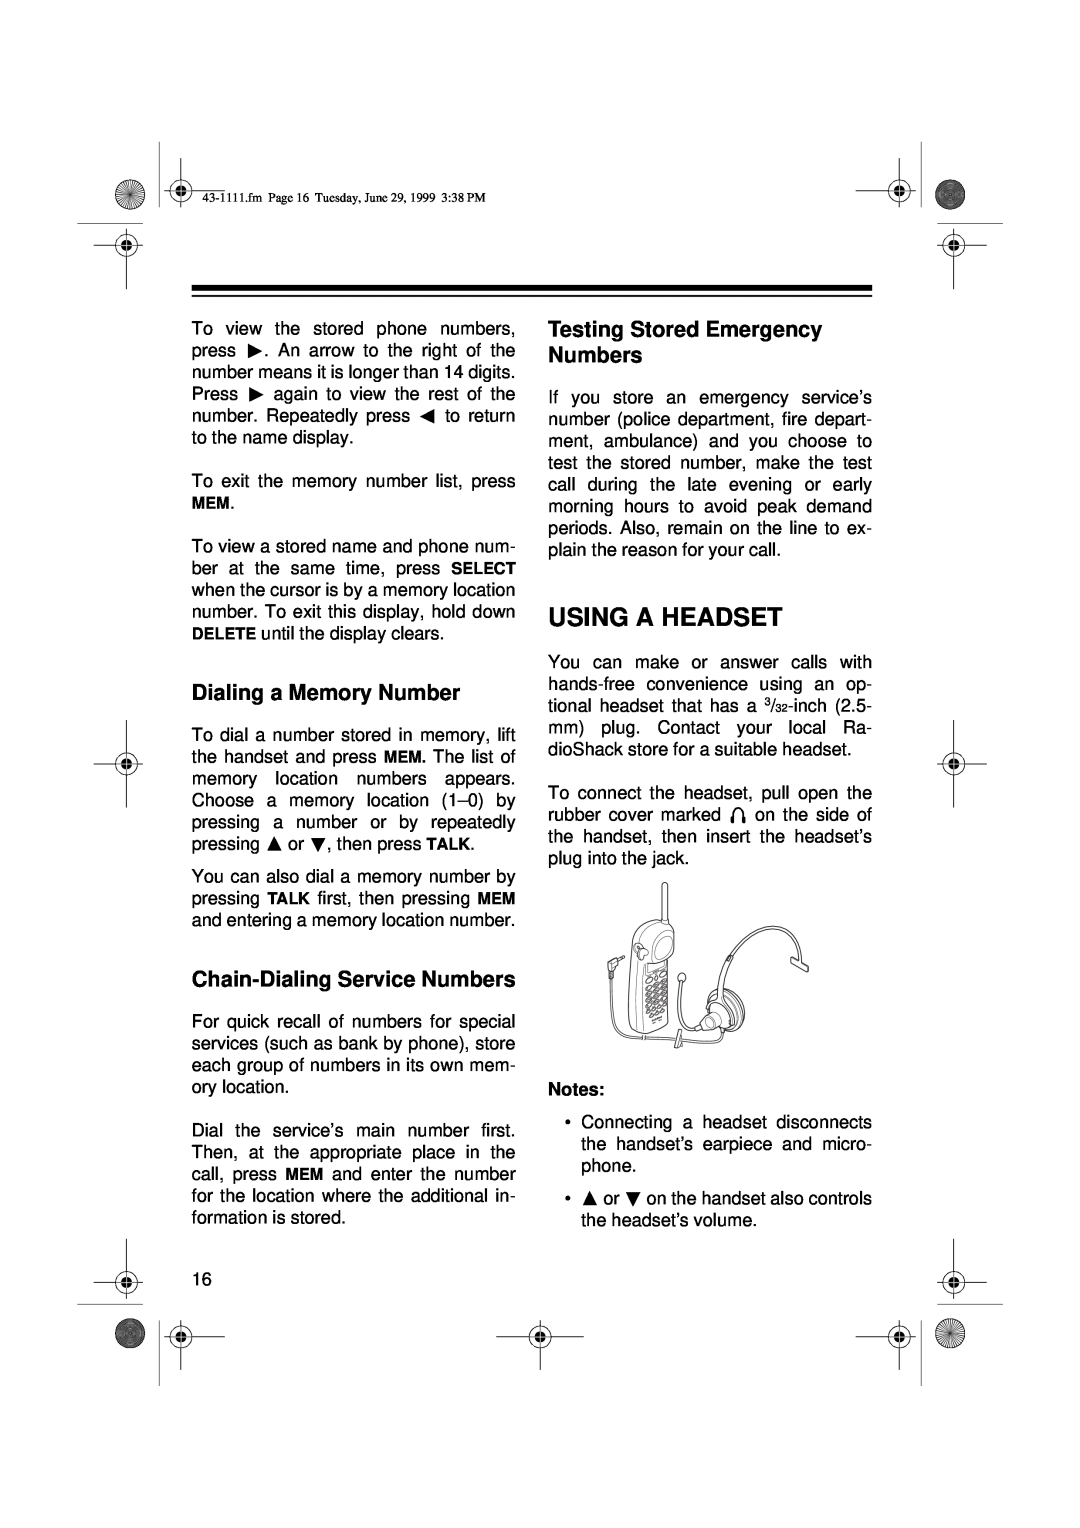 Radio Shack ET-1111 owner manual Using A Headset, Dialing a Memory Number, Chain-Dialing Service Numbers 